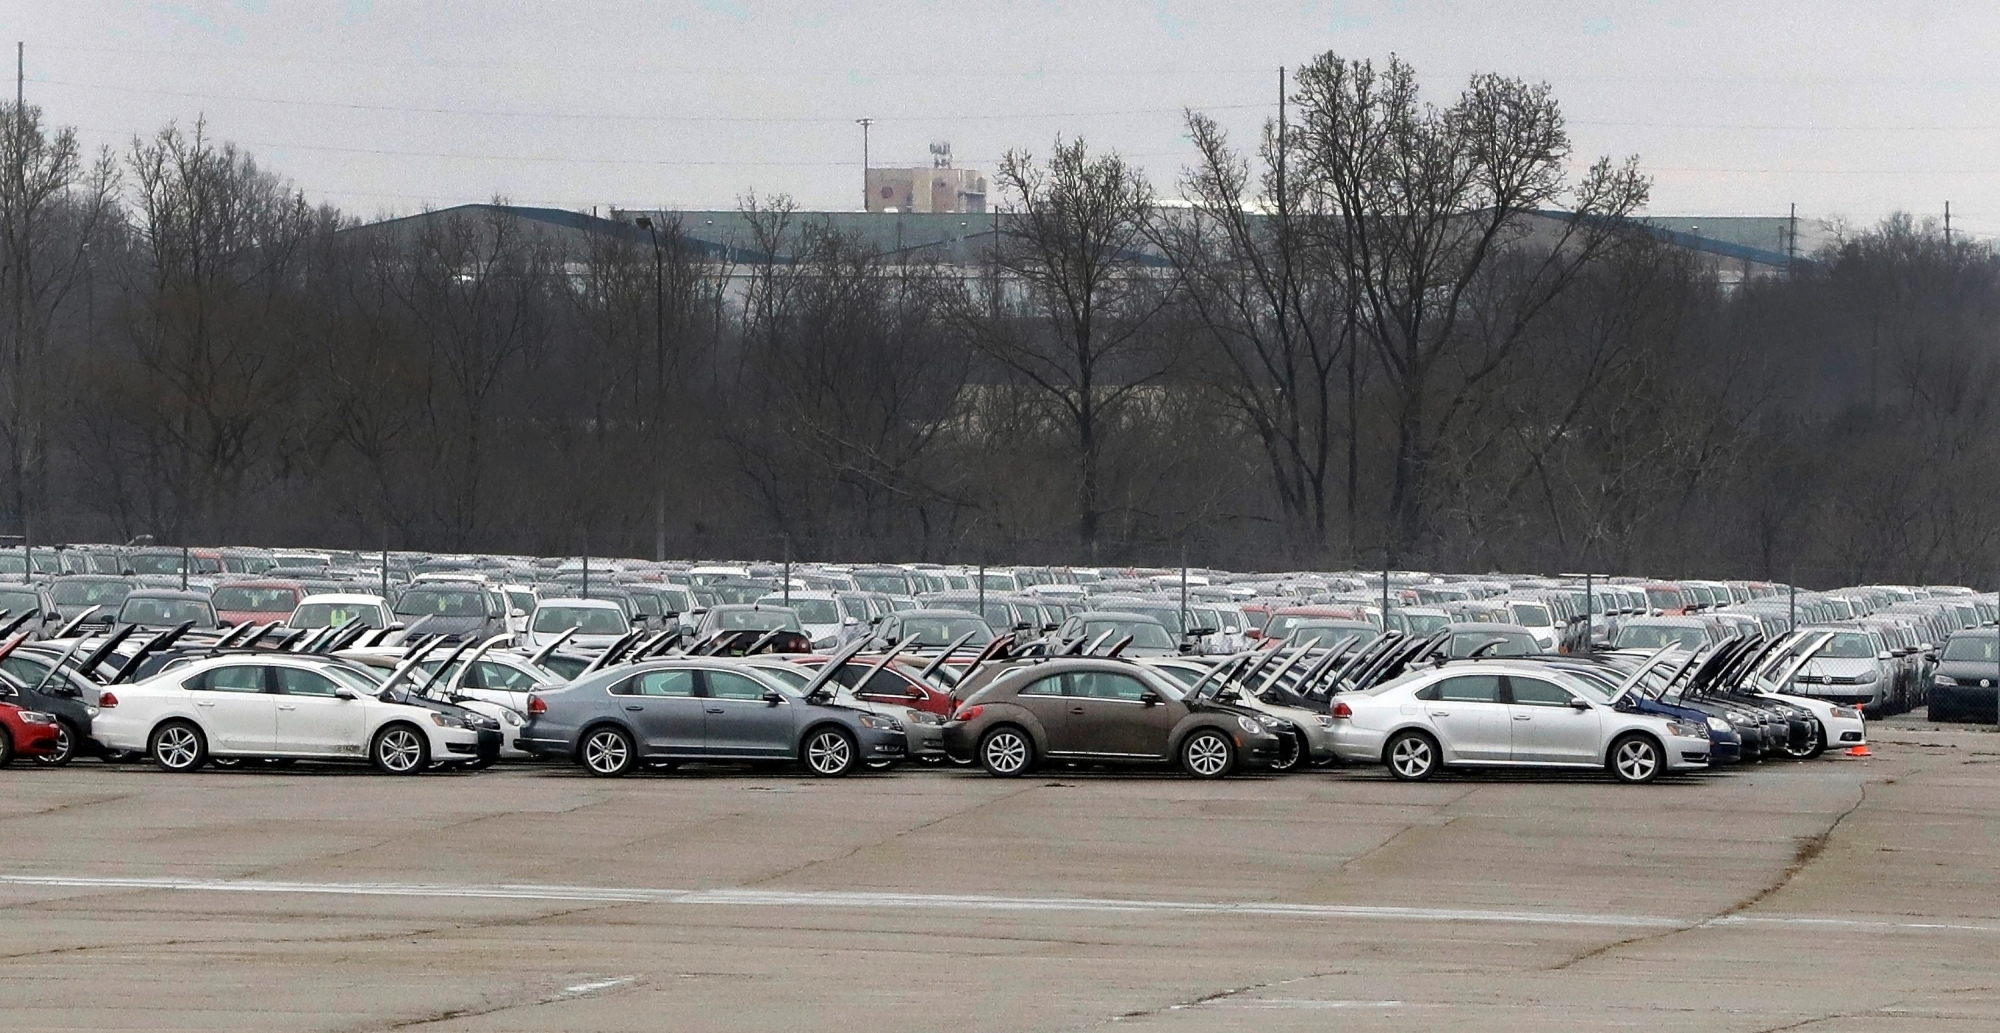 FILE - In this Jan. 24, 2017, file photo, Volkswagen vehicles are stored at the vacant Silverdome in Pontiac, Mich. A U.S. appeals court on Monday, July 9, 2018, approved a $10 billion settlement between Volkswagen and car owners caught up in the company's emissions cheating scandal. (AP Photo/Carlos Osorio, File) VOLKSWAGEN-EMISSIONS SCANDAL